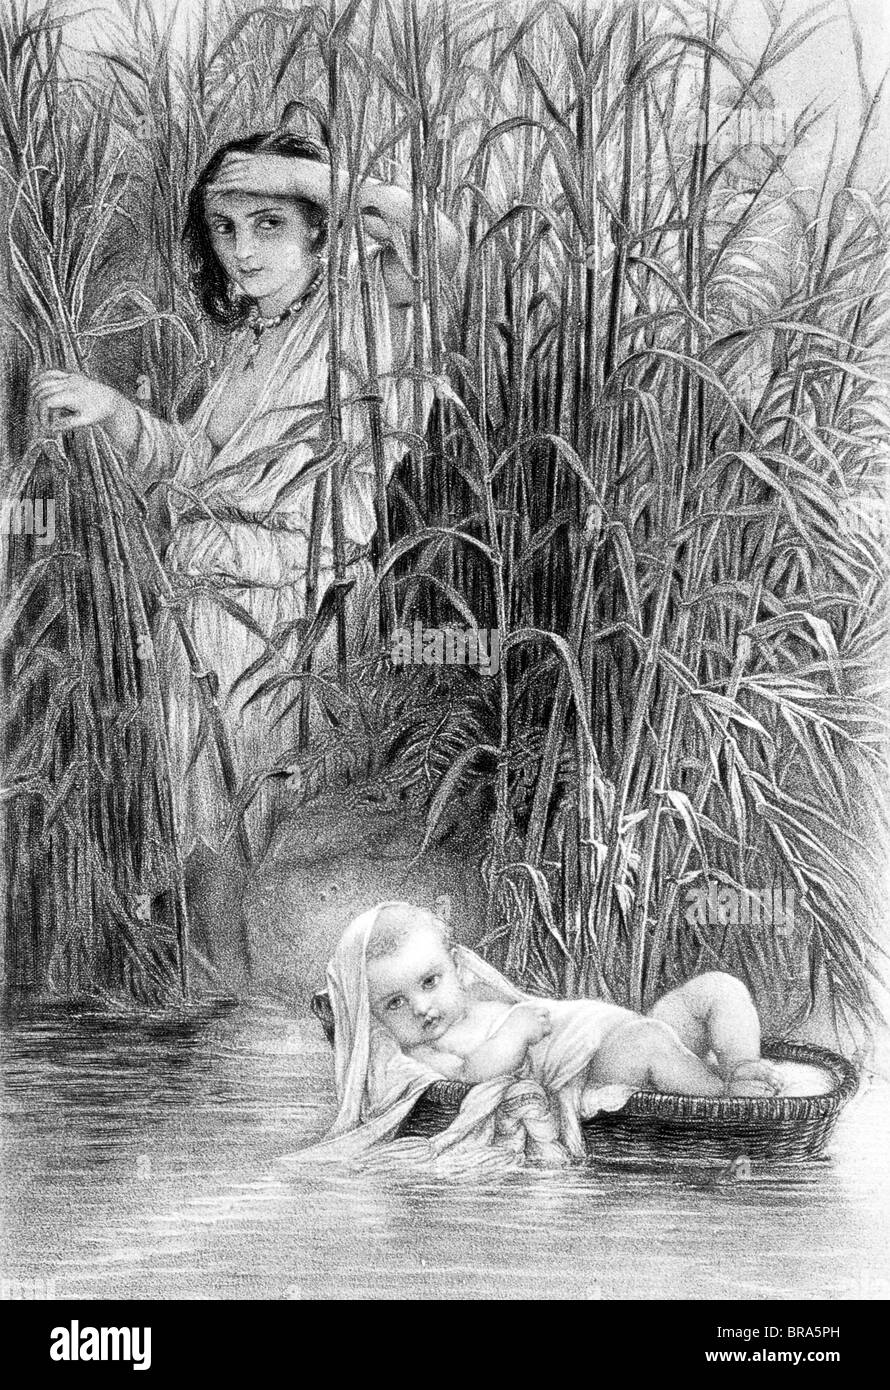 BABY MOSES IN THE BULLRUSHES VINTAGE ENGRAVING Stock Photo